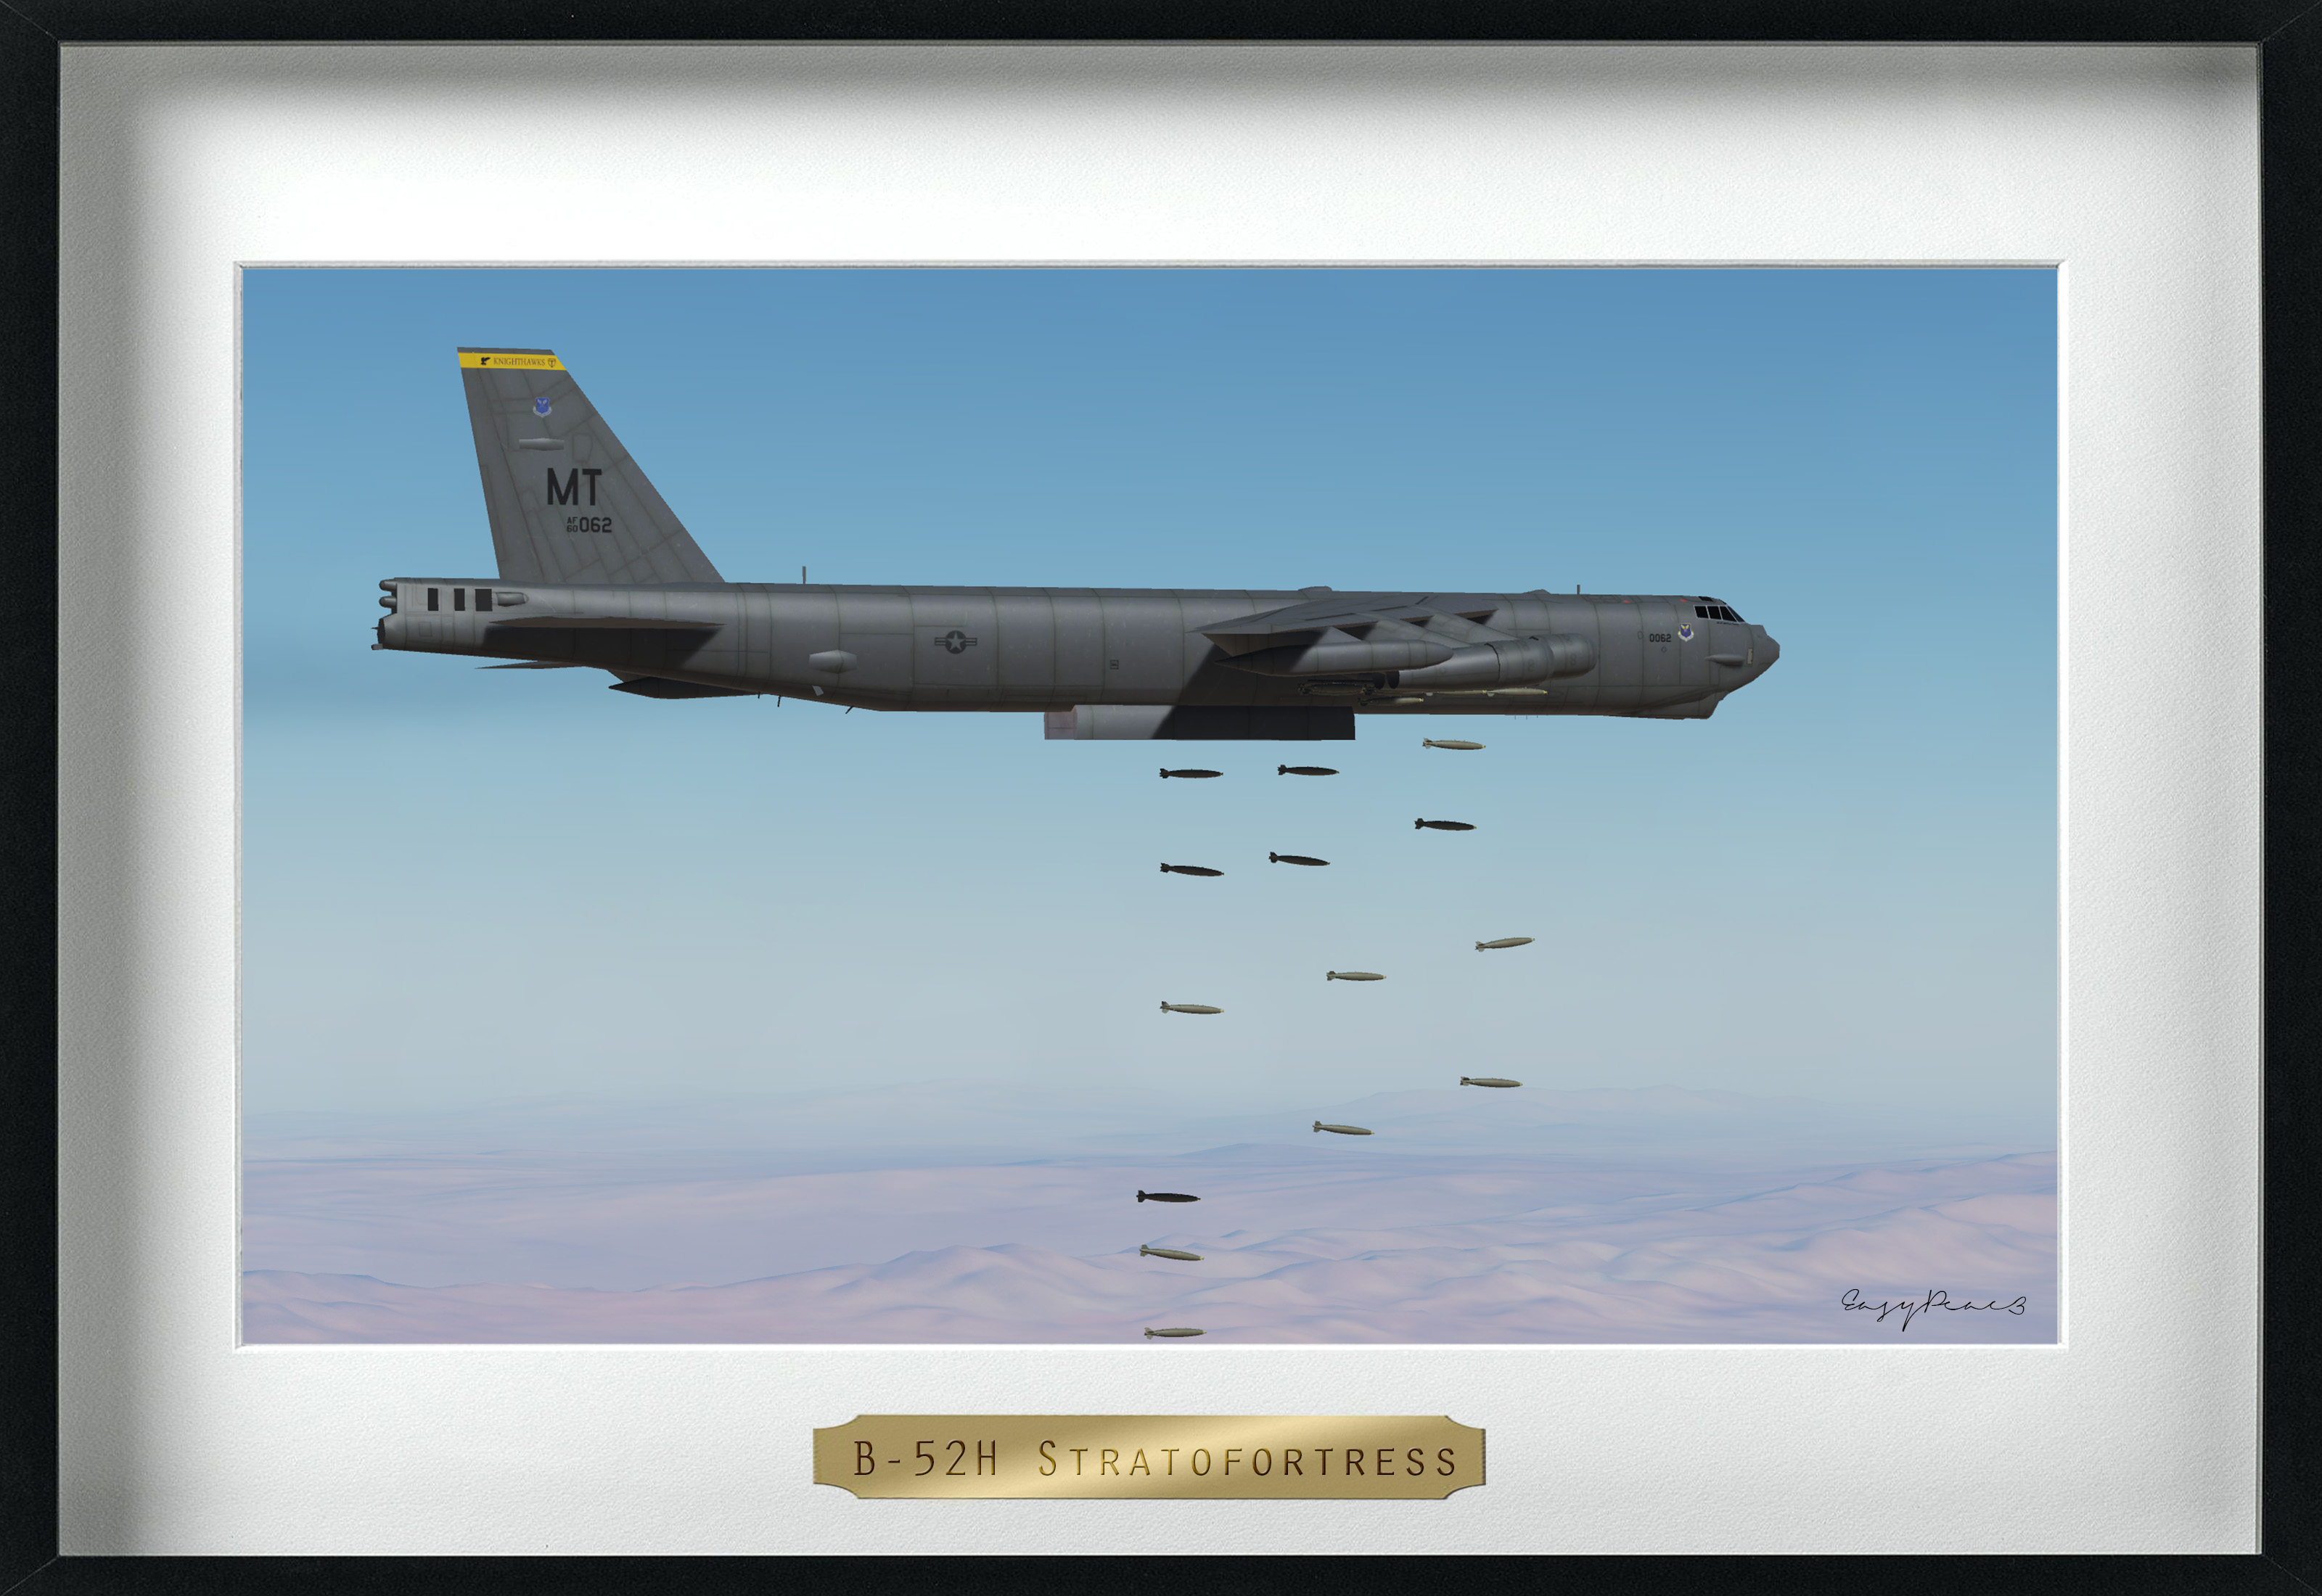 B-52H Stratofortress - SIMPLE NEW TEXTURES & LAYERED PSD